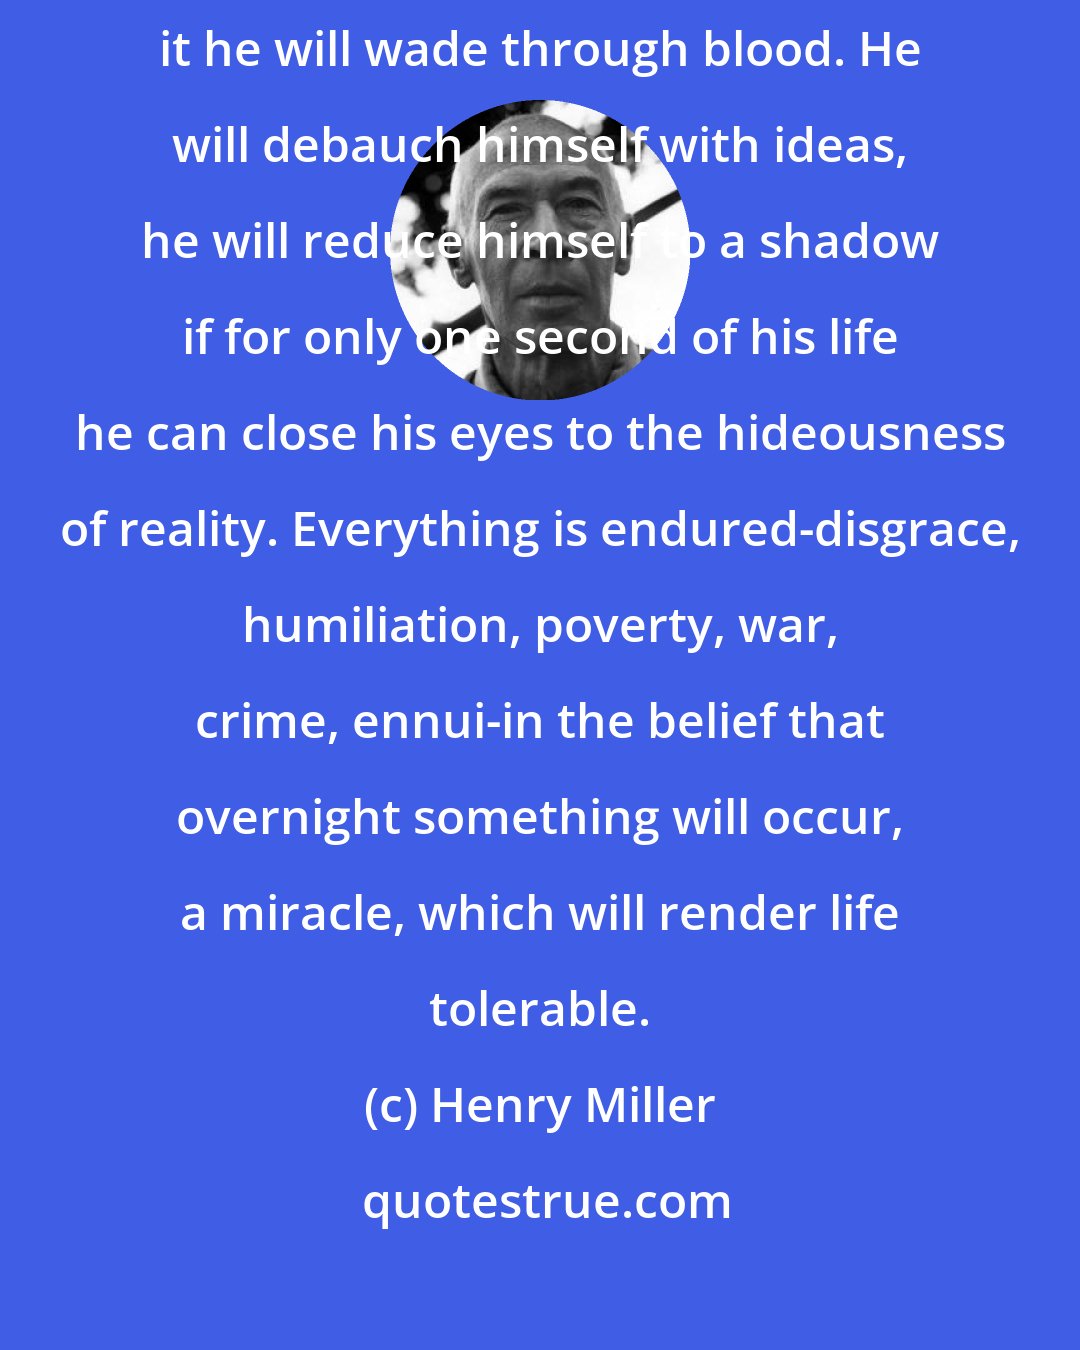 Henry Miller: For some reason or other man looks for the miracle, and to accomplish it he will wade through blood. He will debauch himself with ideas, he will reduce himself to a shadow if for only one second of his life he can close his eyes to the hideousness of reality. Everything is endured-disgrace, humiliation, poverty, war, crime, ennui-in the belief that overnight something will occur, a miracle, which will render life tolerable.